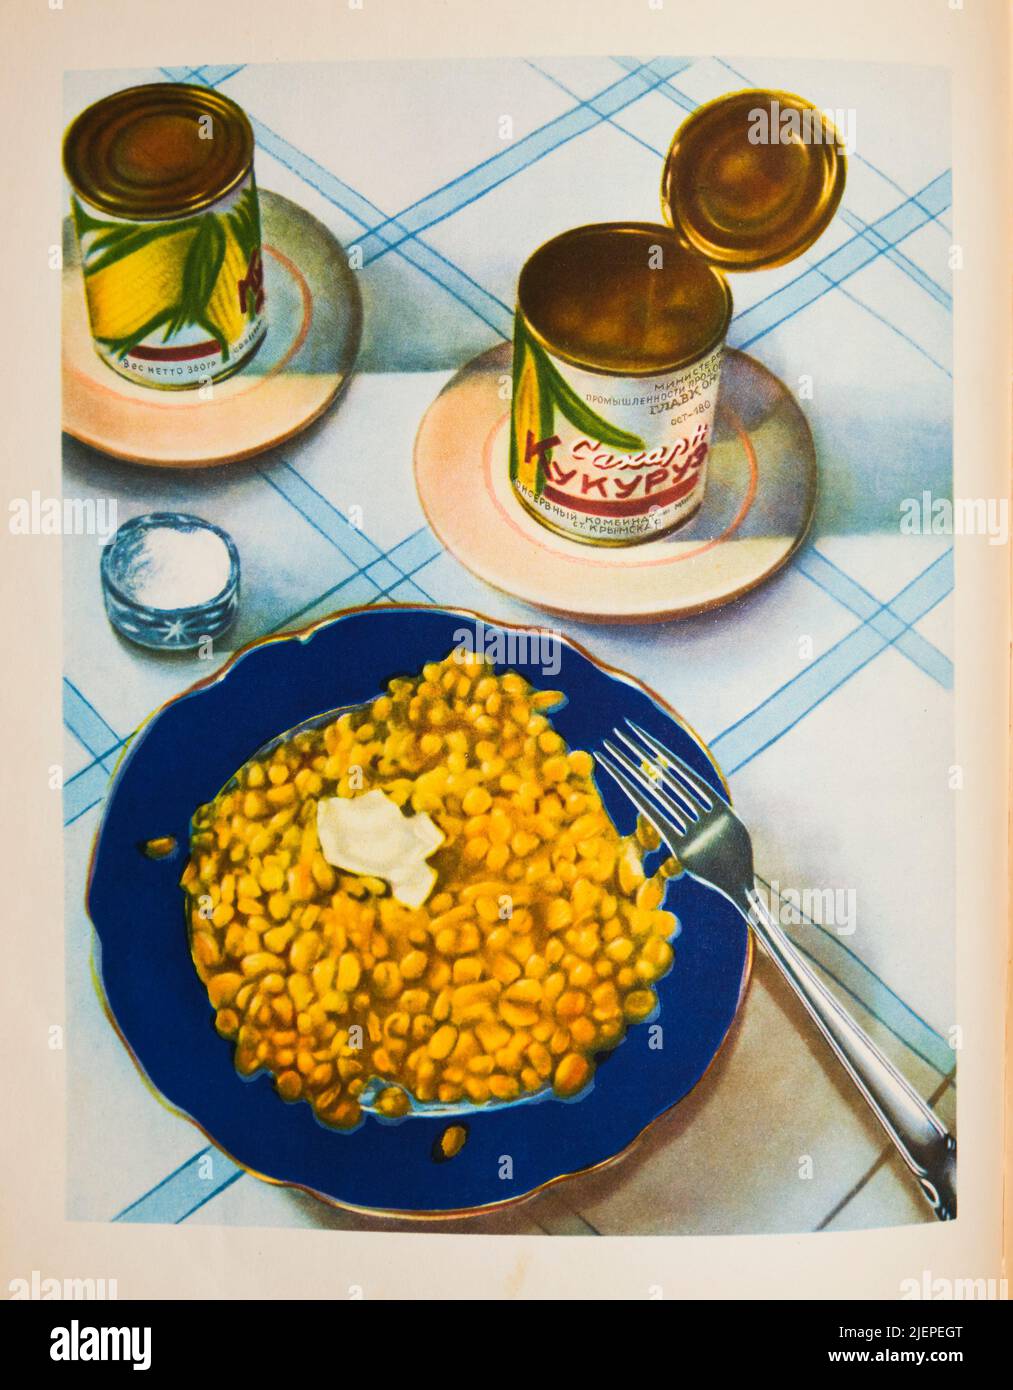 A dish of tin can yellow corn kernels. From the classic 1955 edition of the Soviet, Russian cookbook, The Book About Delicious and Healthy Food. Stock Photo